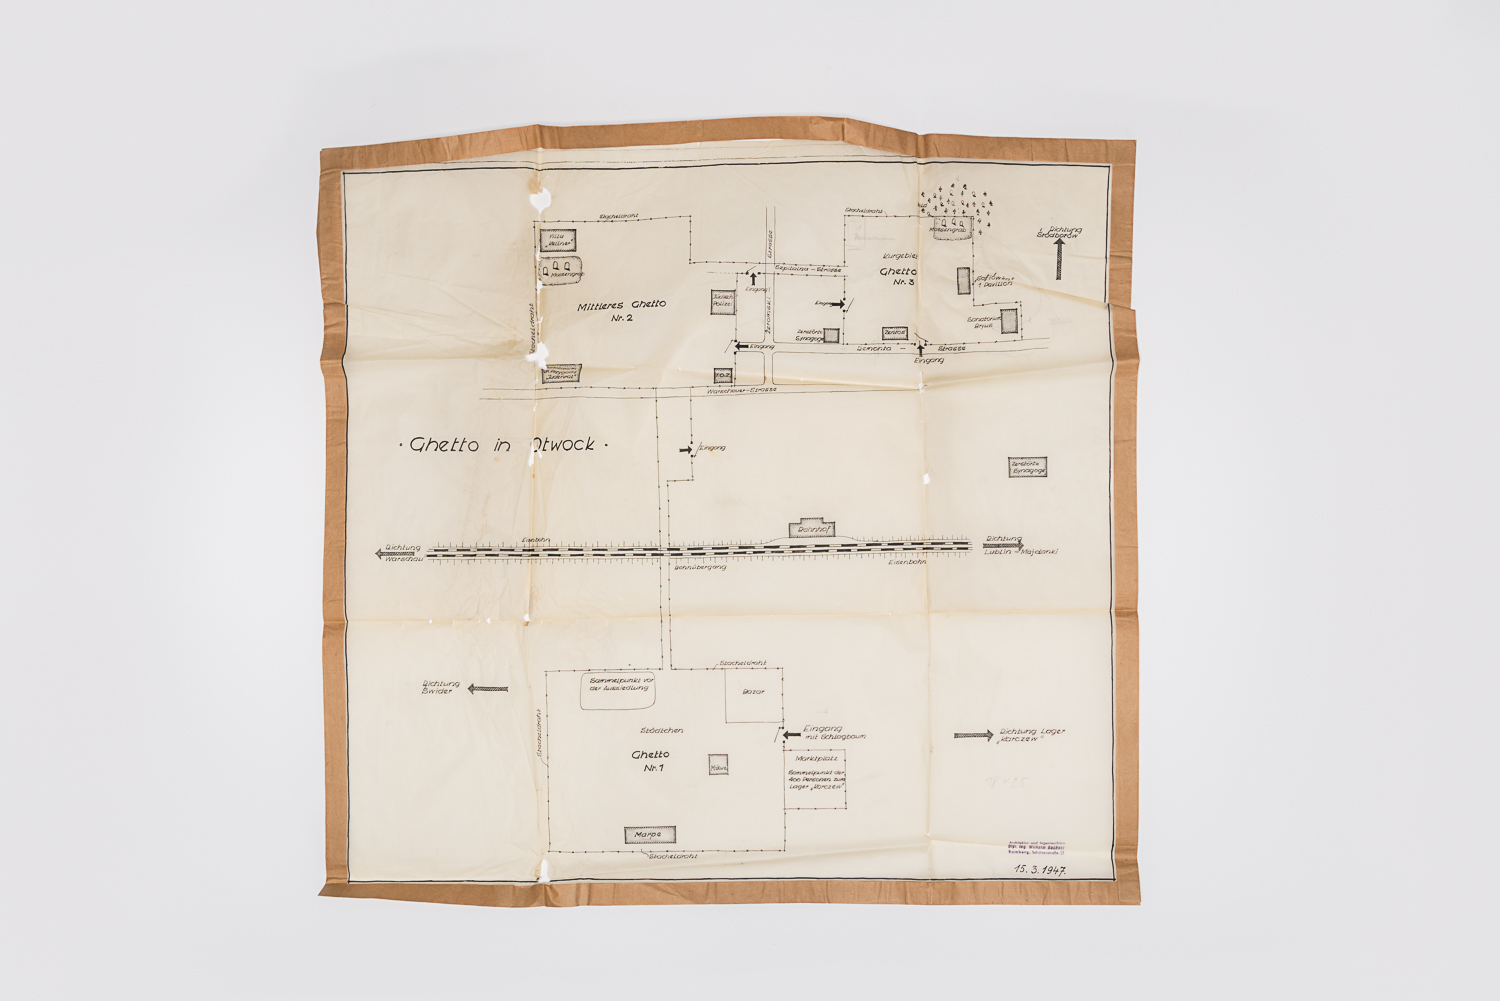 This map of Otwock ghetto was created in 1947 by the Jewish Historic Council of Bamberg, Germany, to document the Holocaust. (Photo: Peter Berra)